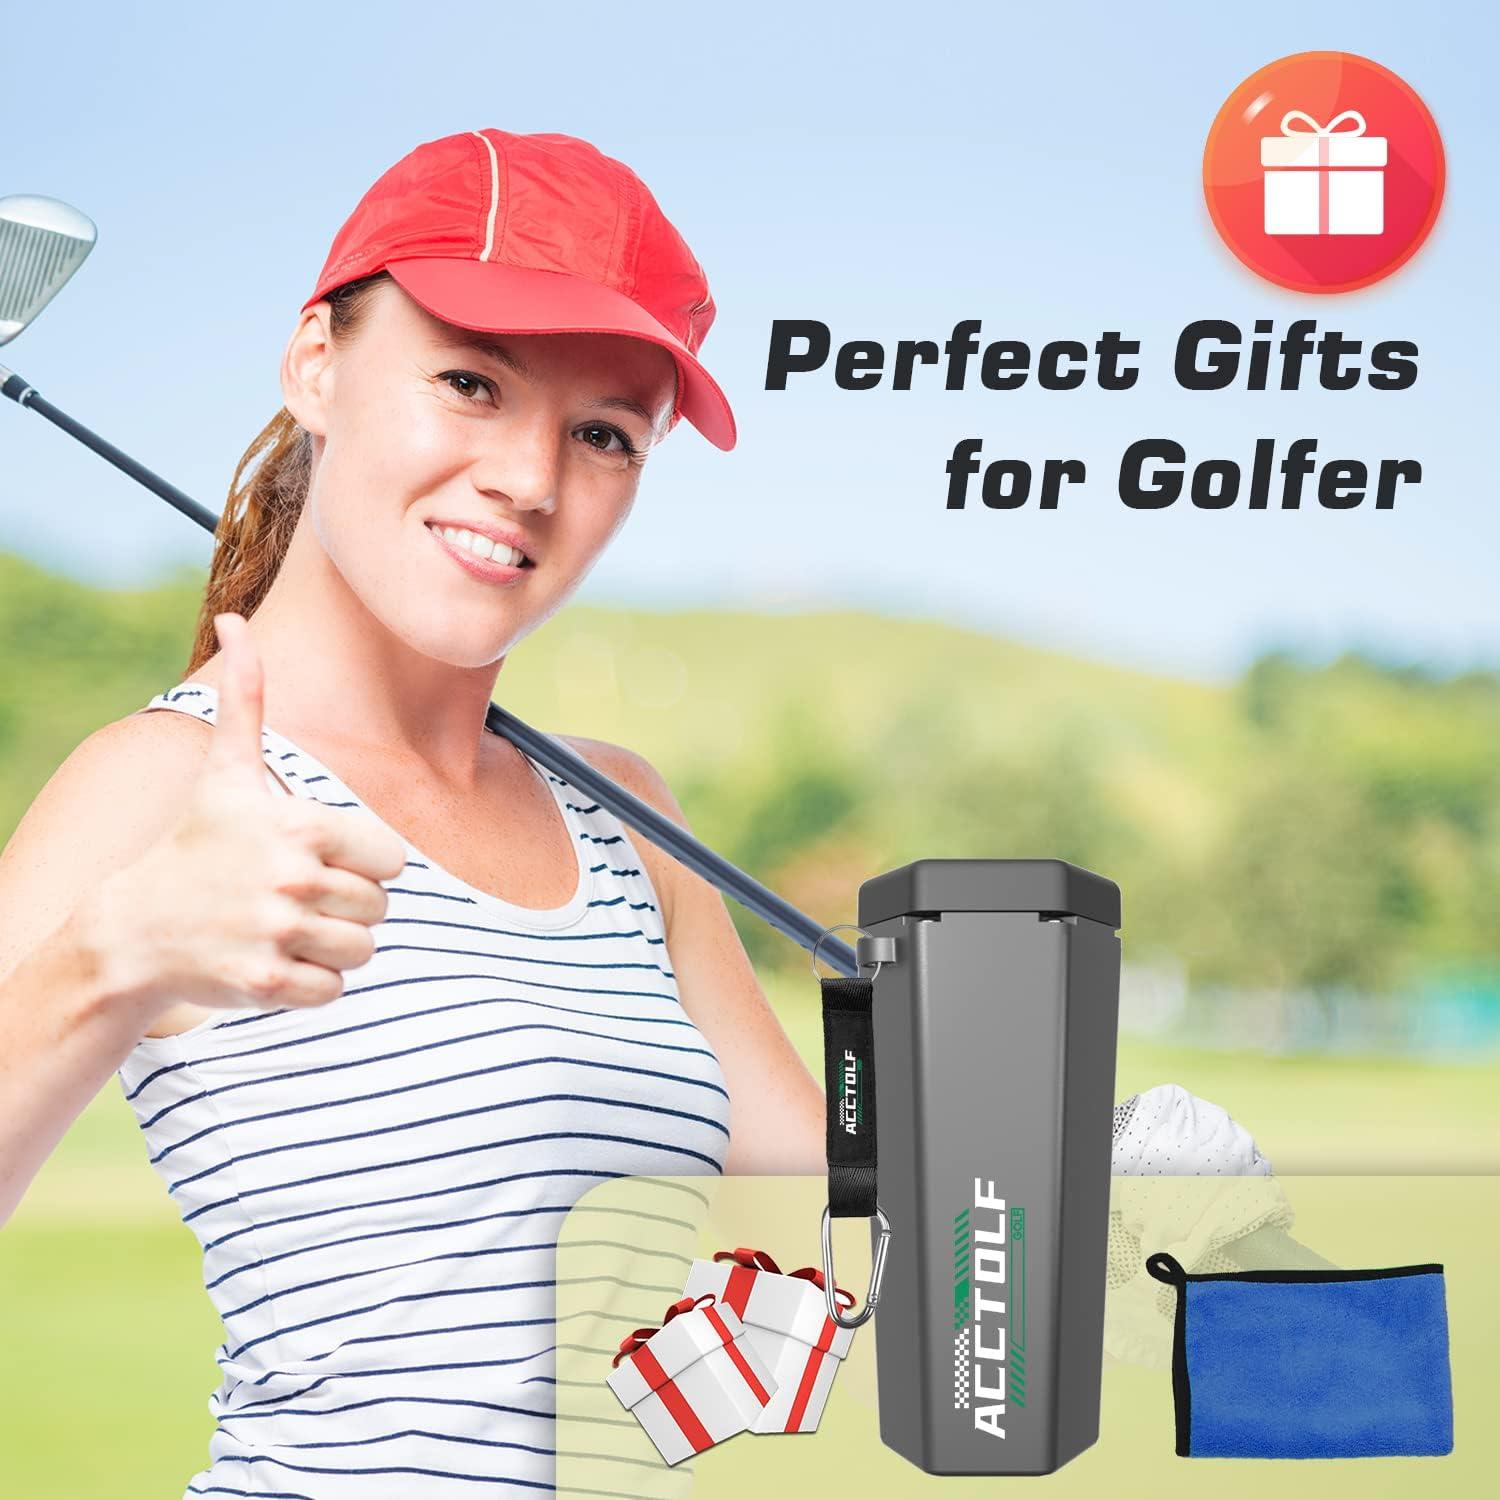 ACCTOLF Portable Golf Ball Washer Cleaner, Golf Accessories for Men Women,  Golf Club Cleaning Kit with Towel Unique Brush Best Golf Gifts for Men/Women